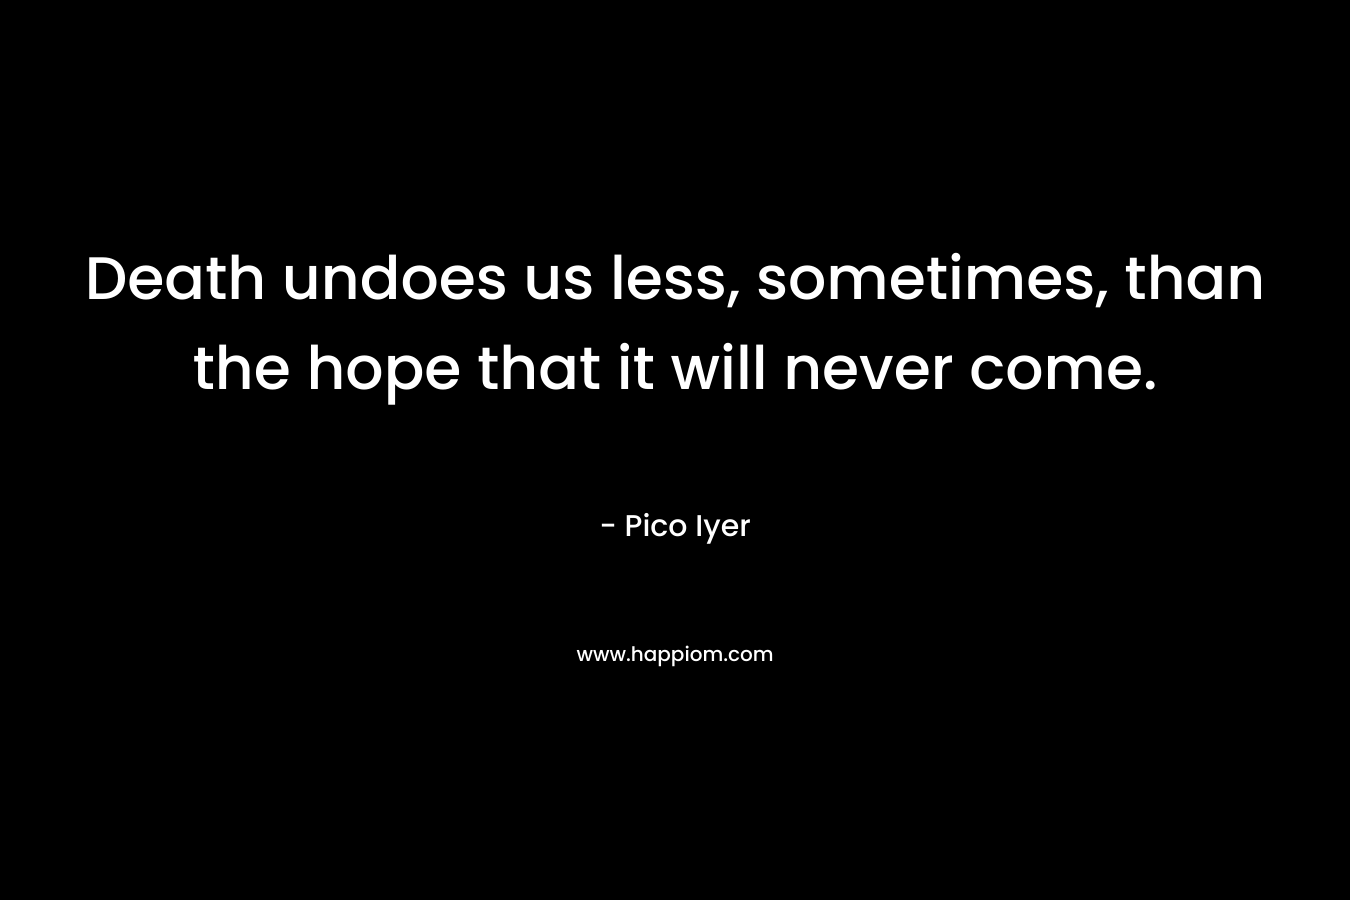 Death undoes us less, sometimes, than the hope that it will never come. – Pico Iyer